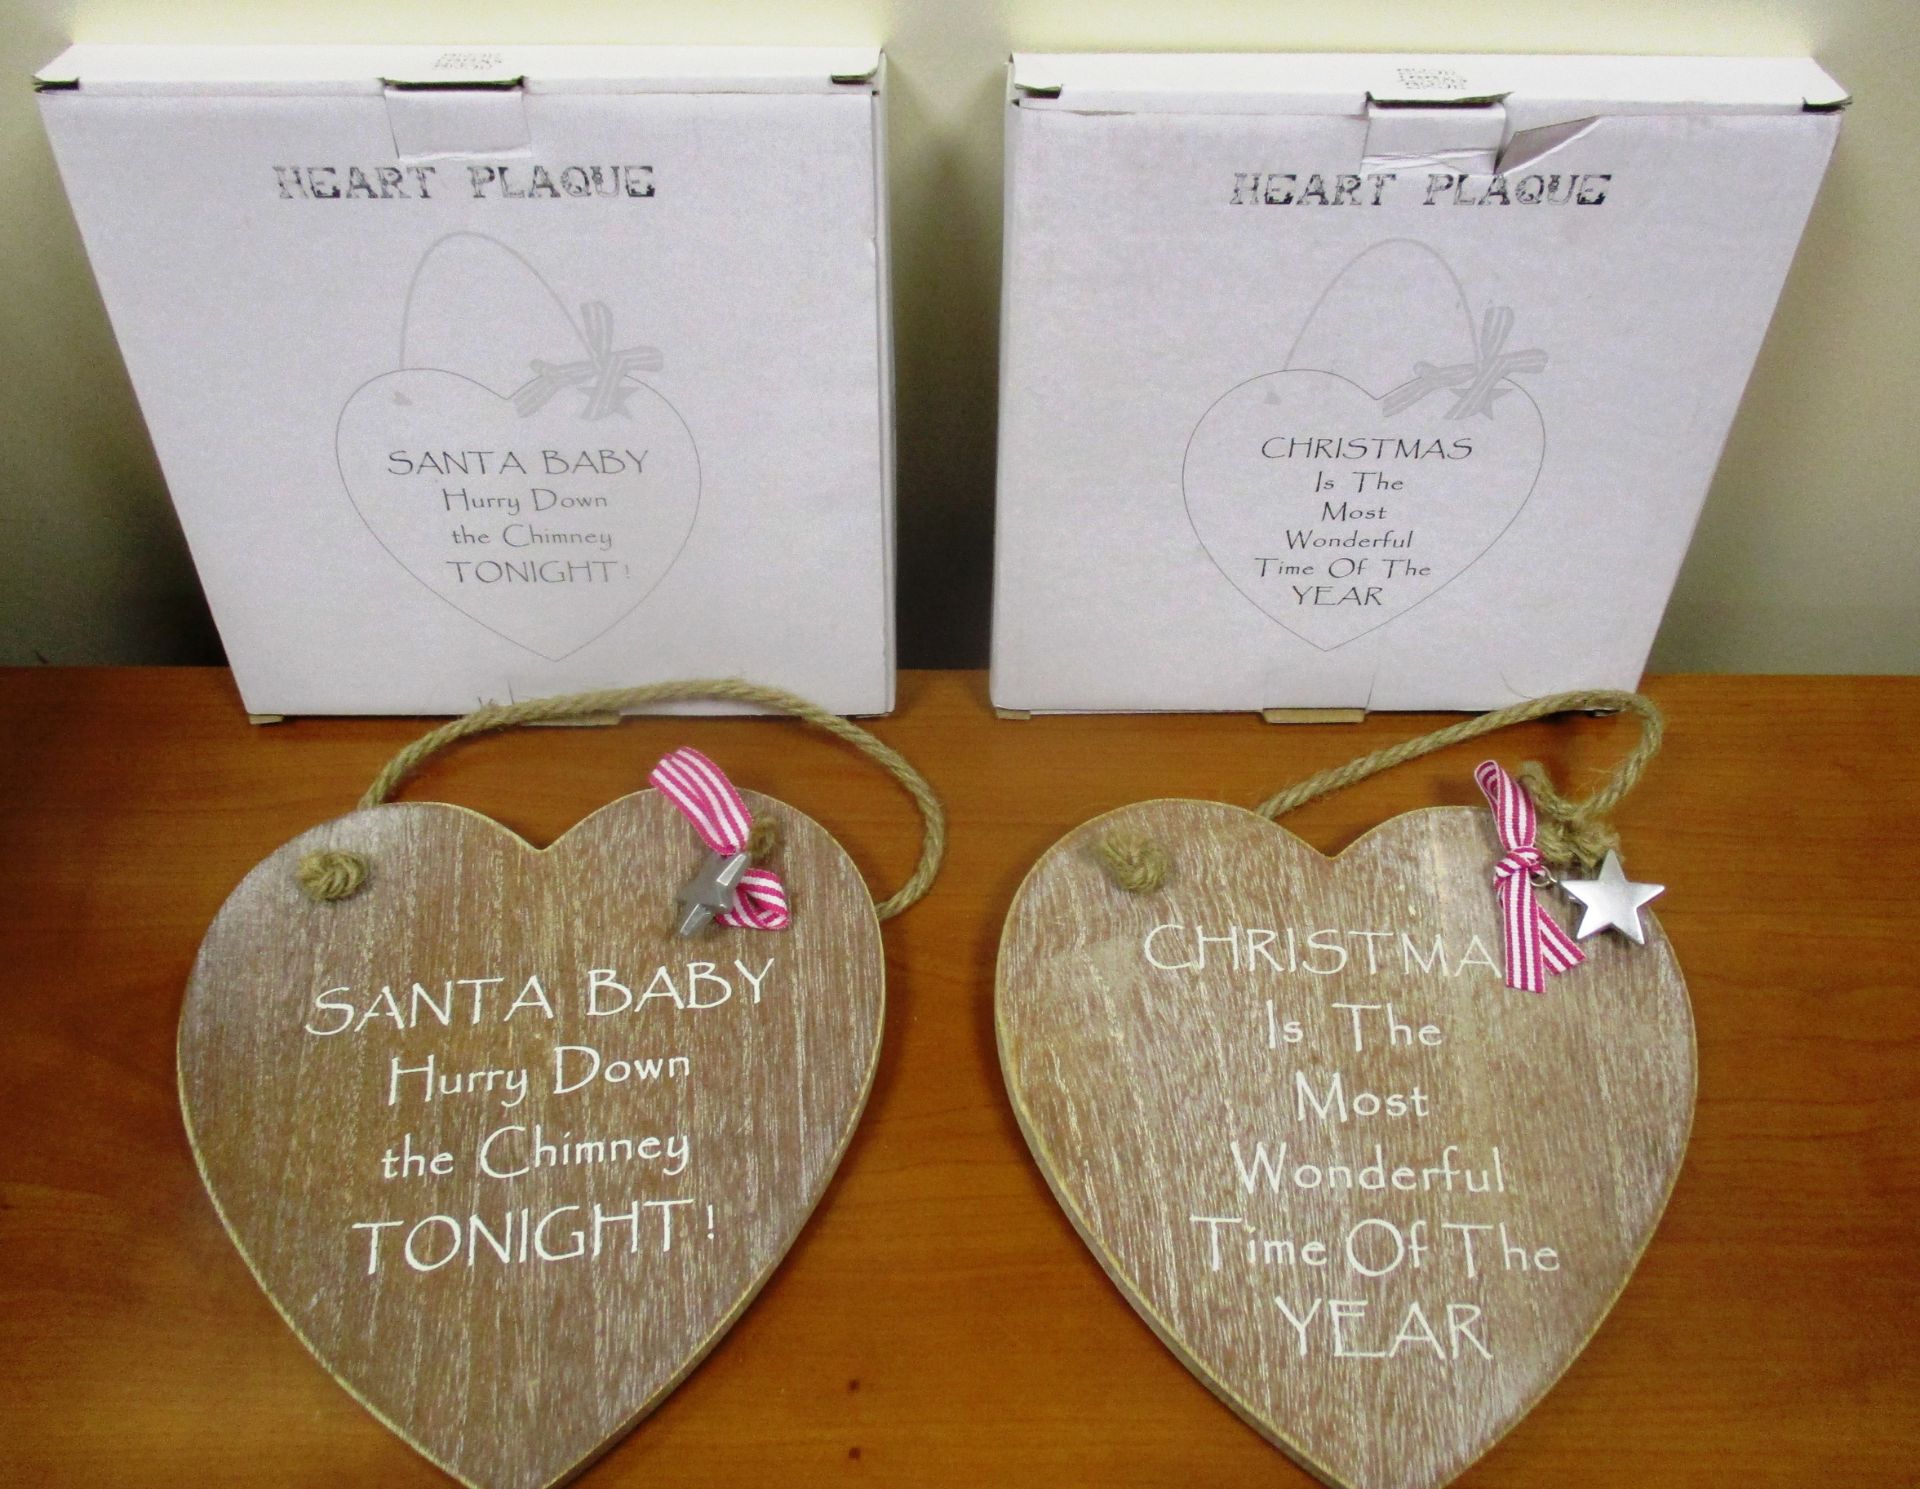 38 x wooden heart shaped Christmas plaques - 35 x 'Santa baby hurry down the chimney tonight' and 3